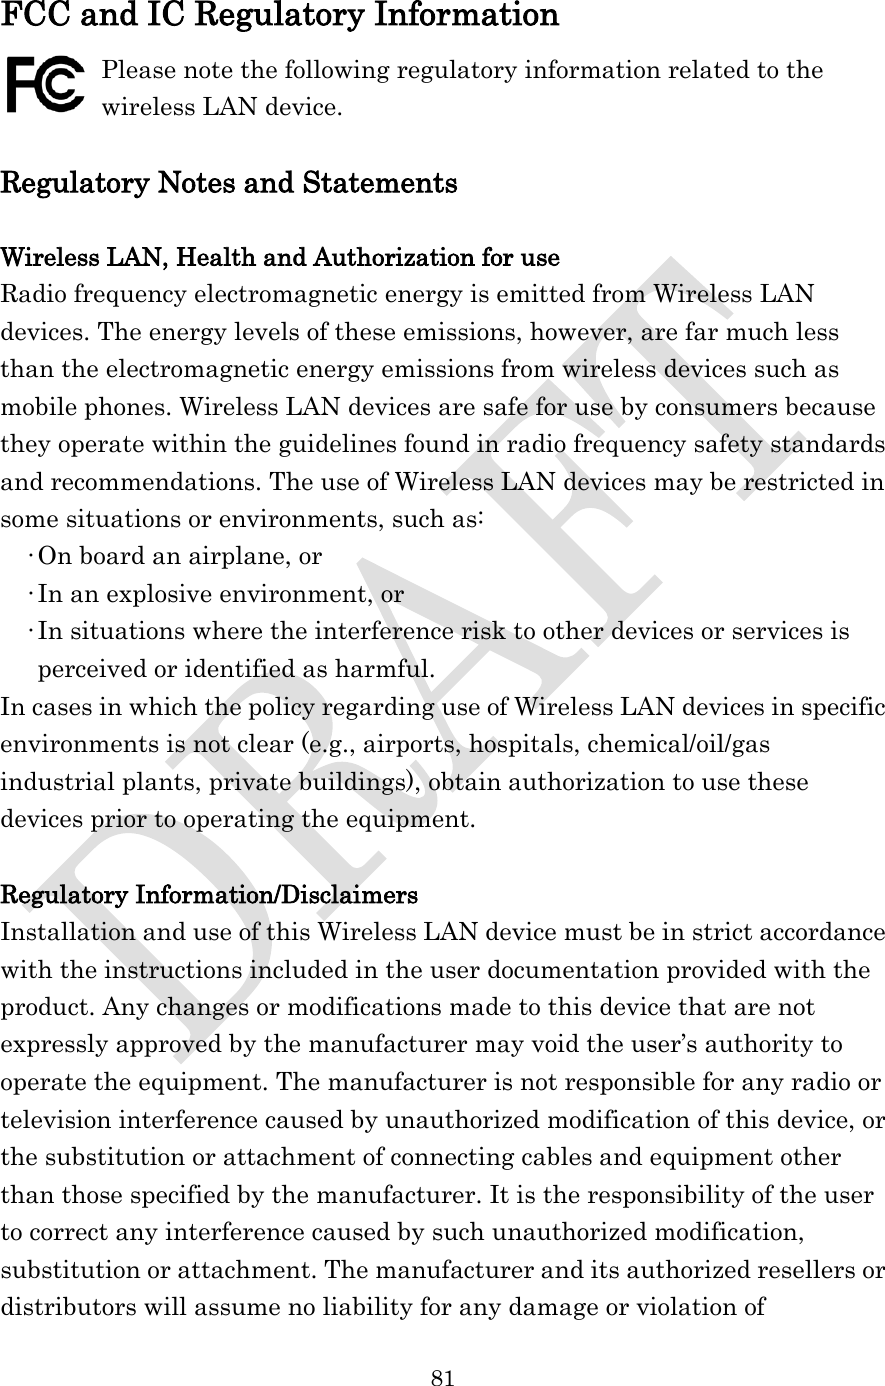  81  FCC and IC Regulatory Information Please note the following regulatory information related to the wireless LAN device.  Regulatory Notes and Statements  Wireless LAN, Health and Authorization for use Radio frequency electromagnetic energy is emitted from Wireless LAN devices. The energy levels of these emissions, however, are far much less than the electromagnetic energy emissions from wireless devices such as mobile phones. Wireless LAN devices are safe for use by consumers because they operate within the guidelines found in radio frequency safety standards and recommendations. The use of Wireless LAN devices may be restricted in some situations or environments, such as: •On board an airplane, or •In an explosive environment, or •In situations where the interference risk to other devices or services is perceived or identified as harmful. In cases in which the policy regarding use of Wireless LAN devices in specific environments is not clear (e.g., airports, hospitals, chemical/oil/gas industrial plants, private buildings), obtain authorization to use these devices prior to operating the equipment.  Regulatory Information/Disclaimers Installation and use of this Wireless LAN device must be in strict accordance with the instructions included in the user documentation provided with the product. Any changes or modifications made to this device that are not expressly approved by the manufacturer may void the user’s authority to operate the equipment. The manufacturer is not responsible for any radio or television interference caused by unauthorized modification of this device, or the substitution or attachment of connecting cables and equipment other than those specified by the manufacturer. It is the responsibility of the user to correct any interference caused by such unauthorized modification, substitution or attachment. The manufacturer and its authorized resellers or distributors will assume no liability for any damage or violation of 